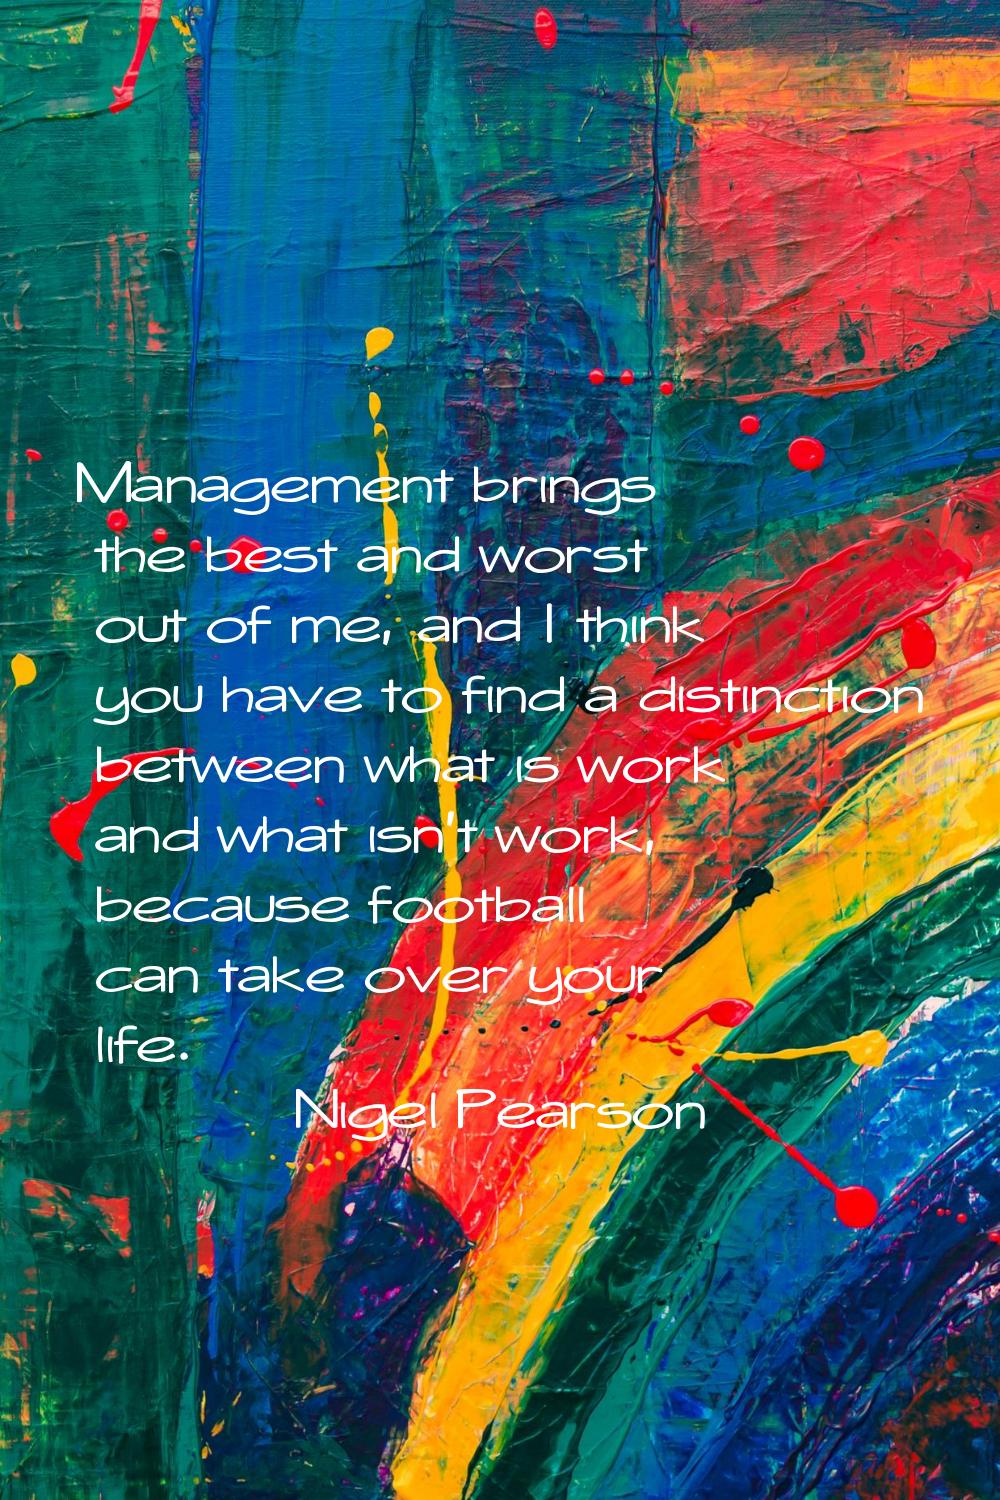 Management brings the best and worst out of me, and I think you have to find a distinction between 